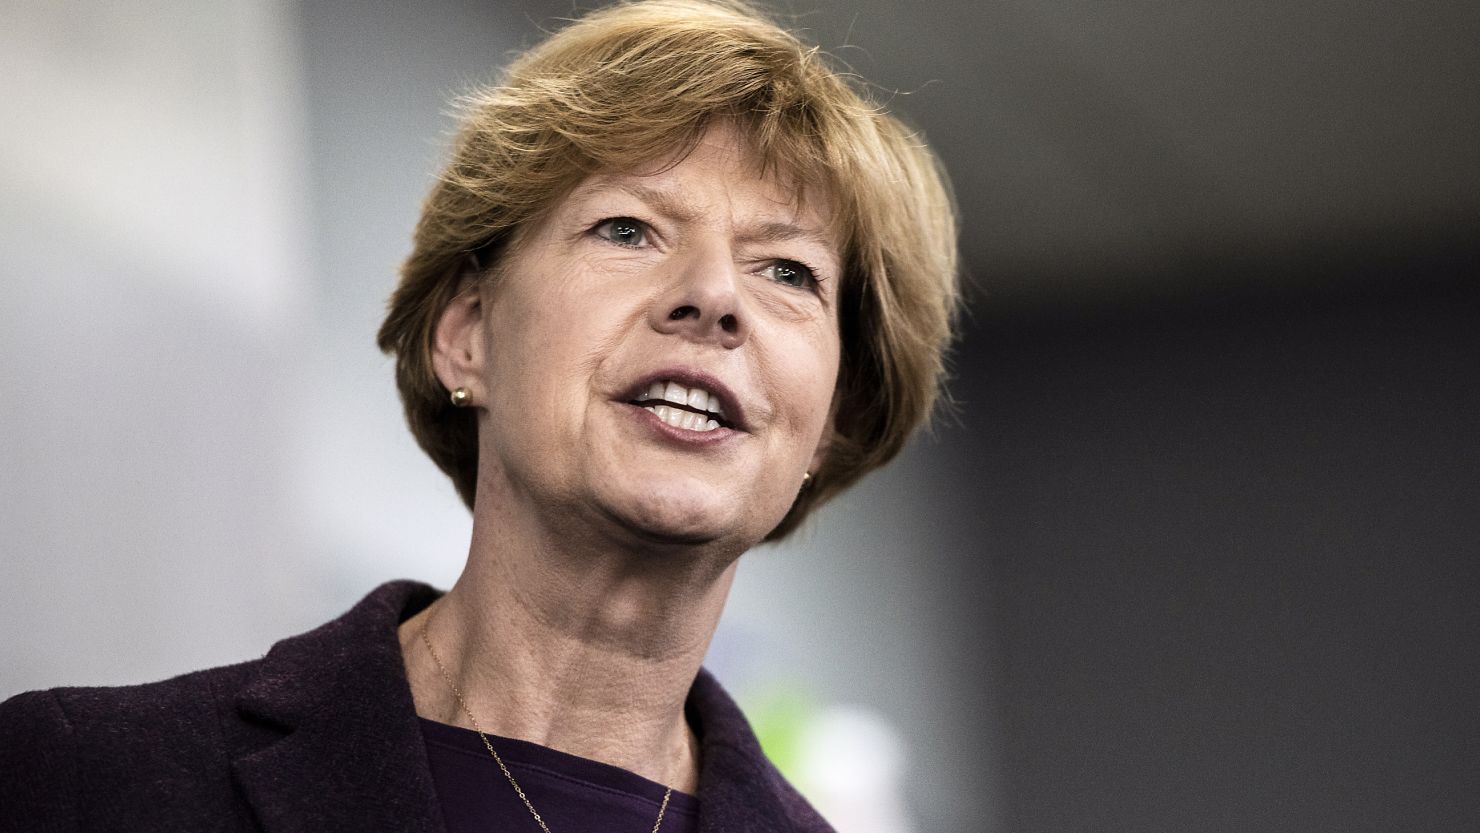 US Sen. Tammy Baldwin, a Wisconsin Democrat, addresses supporters and workers at the Democratic Party of Rock County office in downtown Janesville, Wisconsin.  (Angela Major/The Janesville Gazette via AP, File)